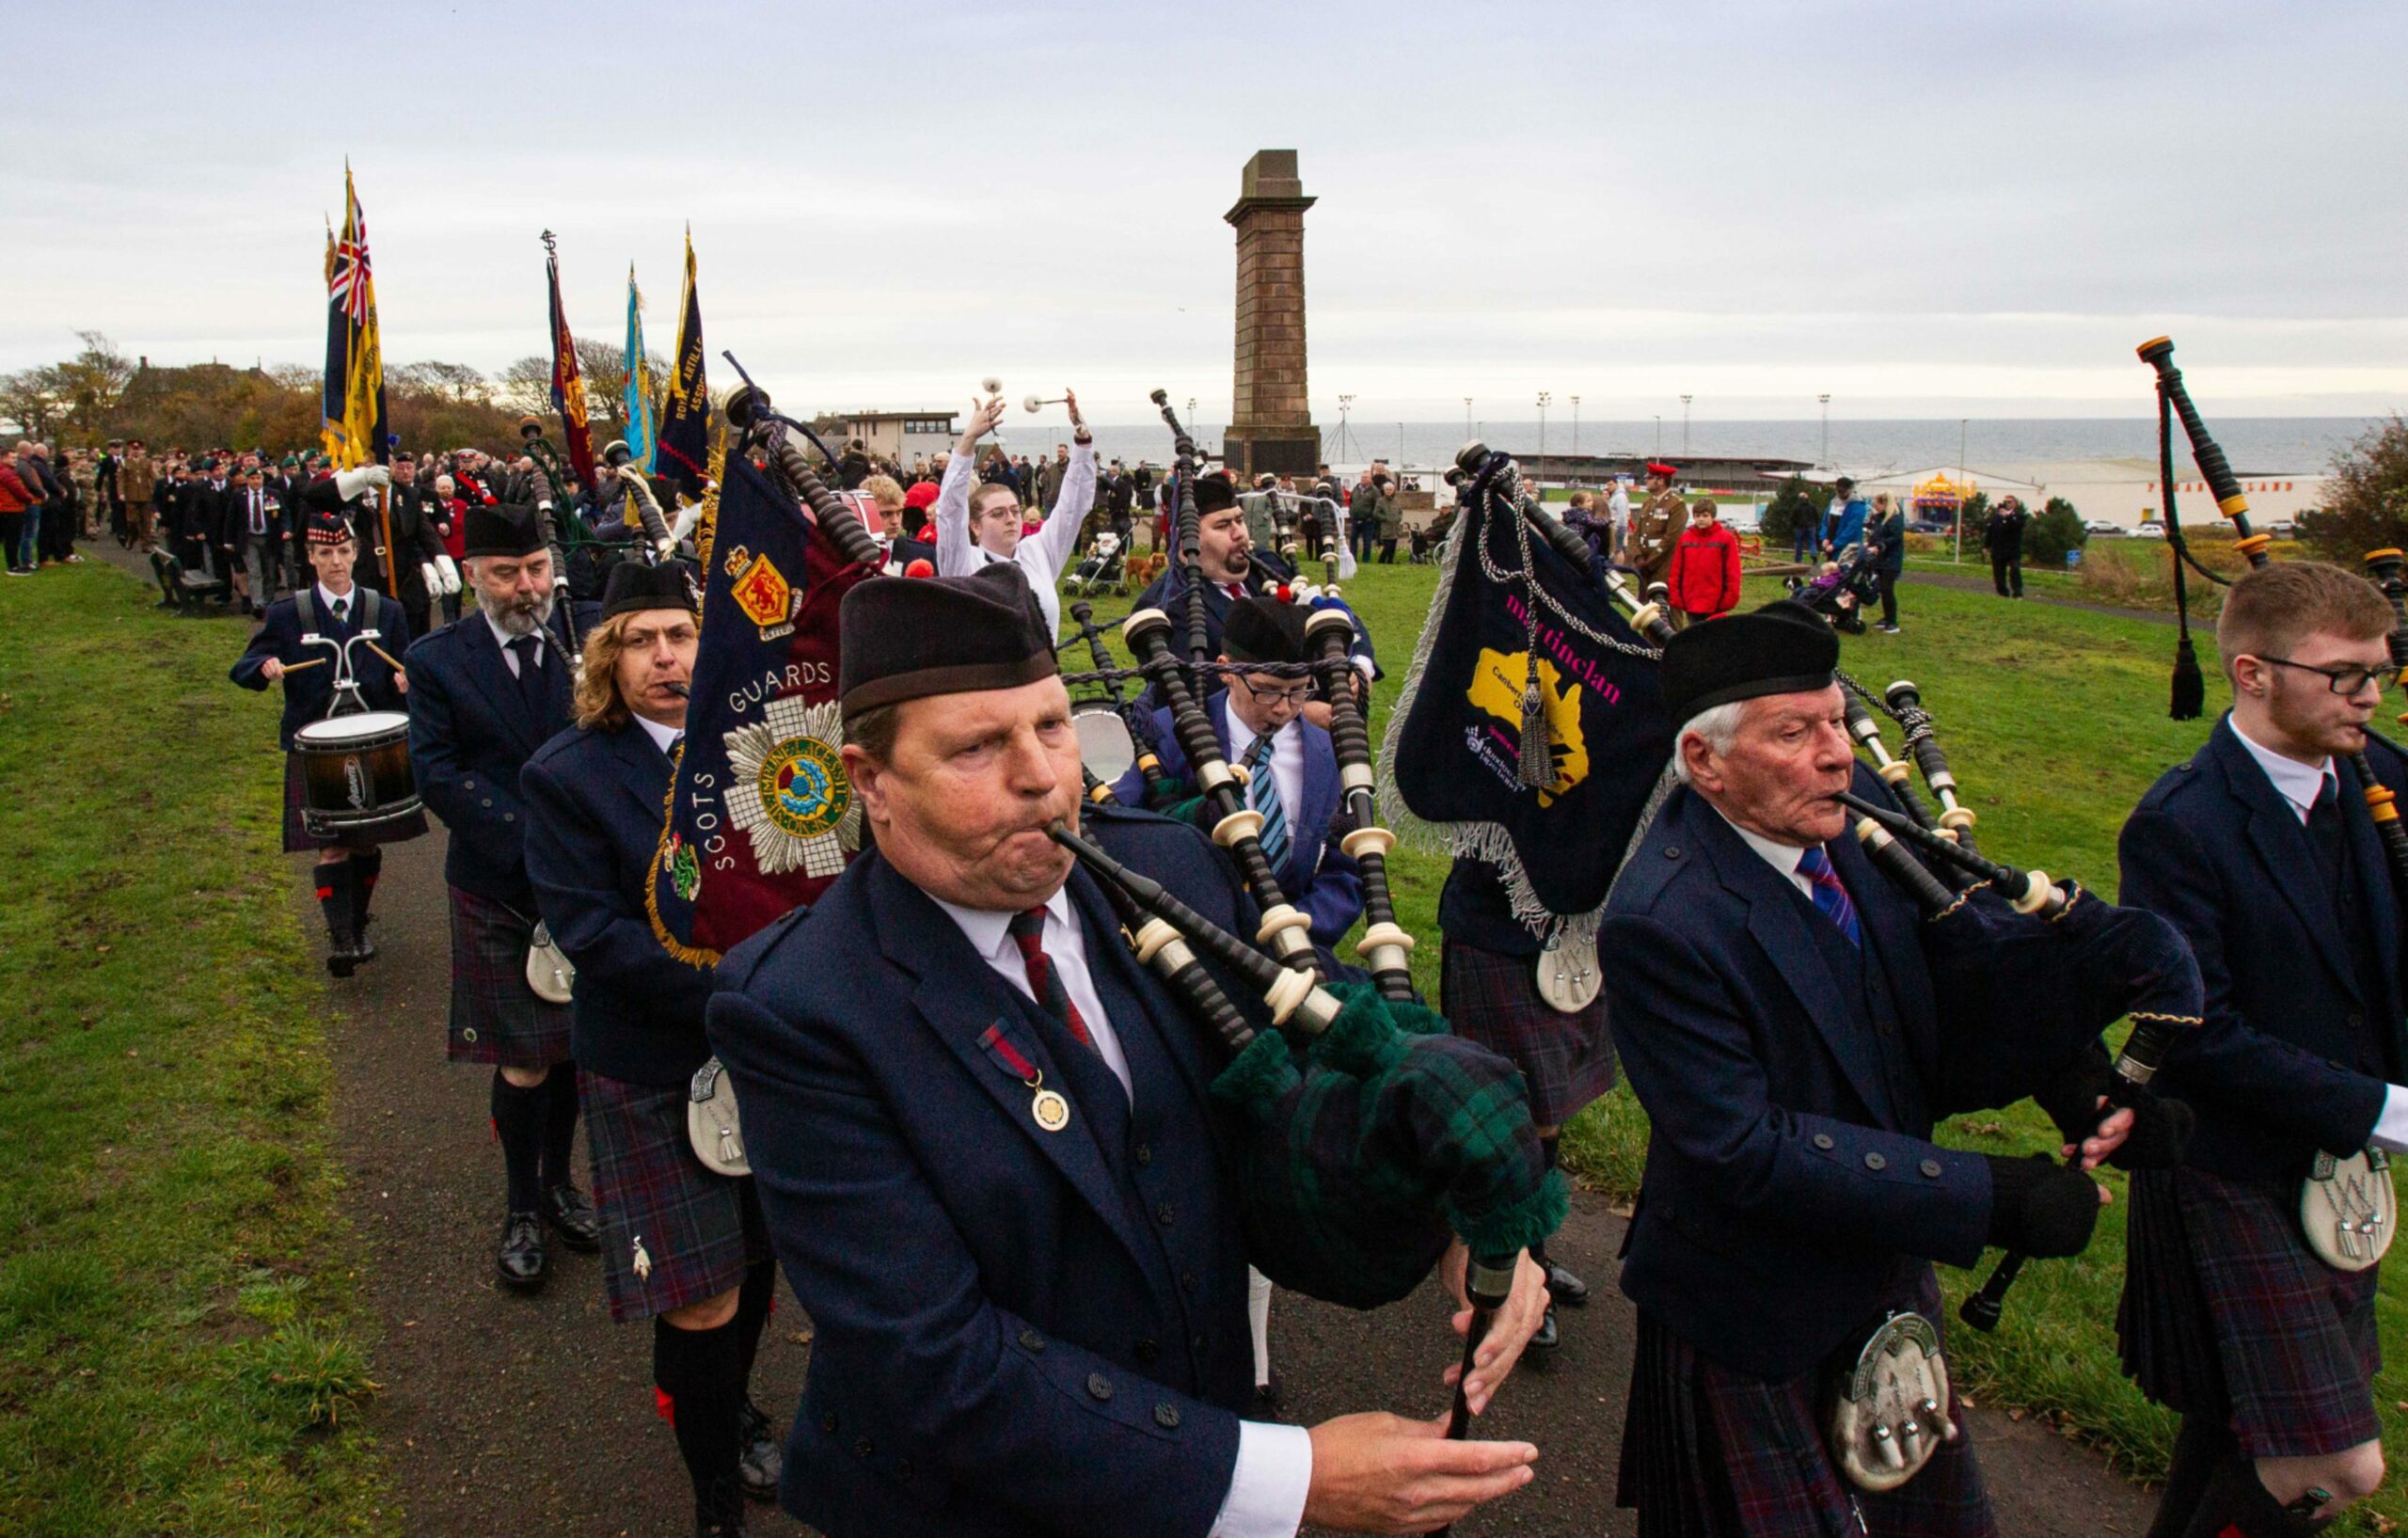 Pipers playing at a remembrance day event service in Arbroath, Angus